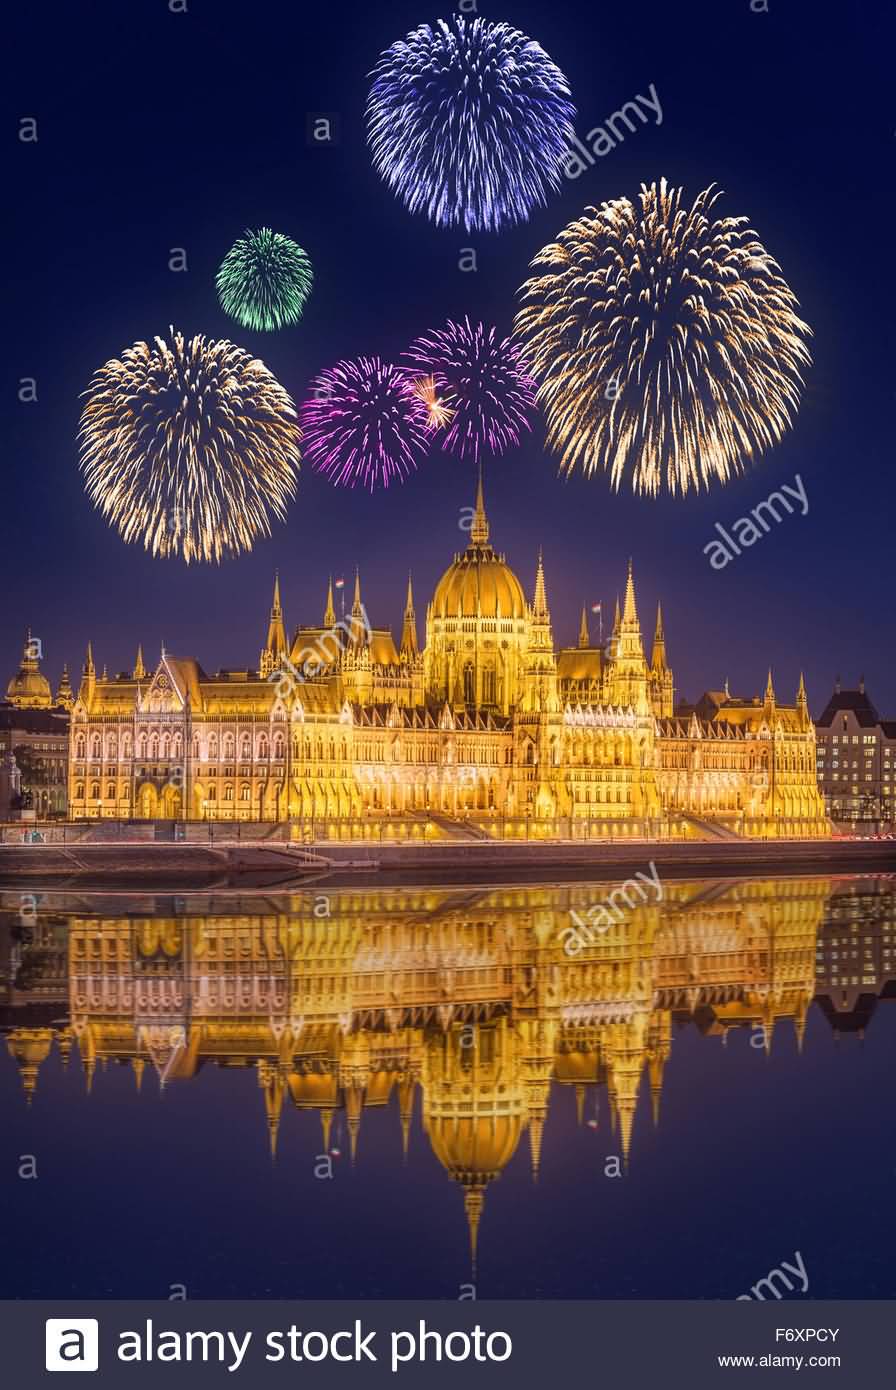 Beautiful Fireworks Under Hungarian Parliament Building At Night In Budapest, Hungary